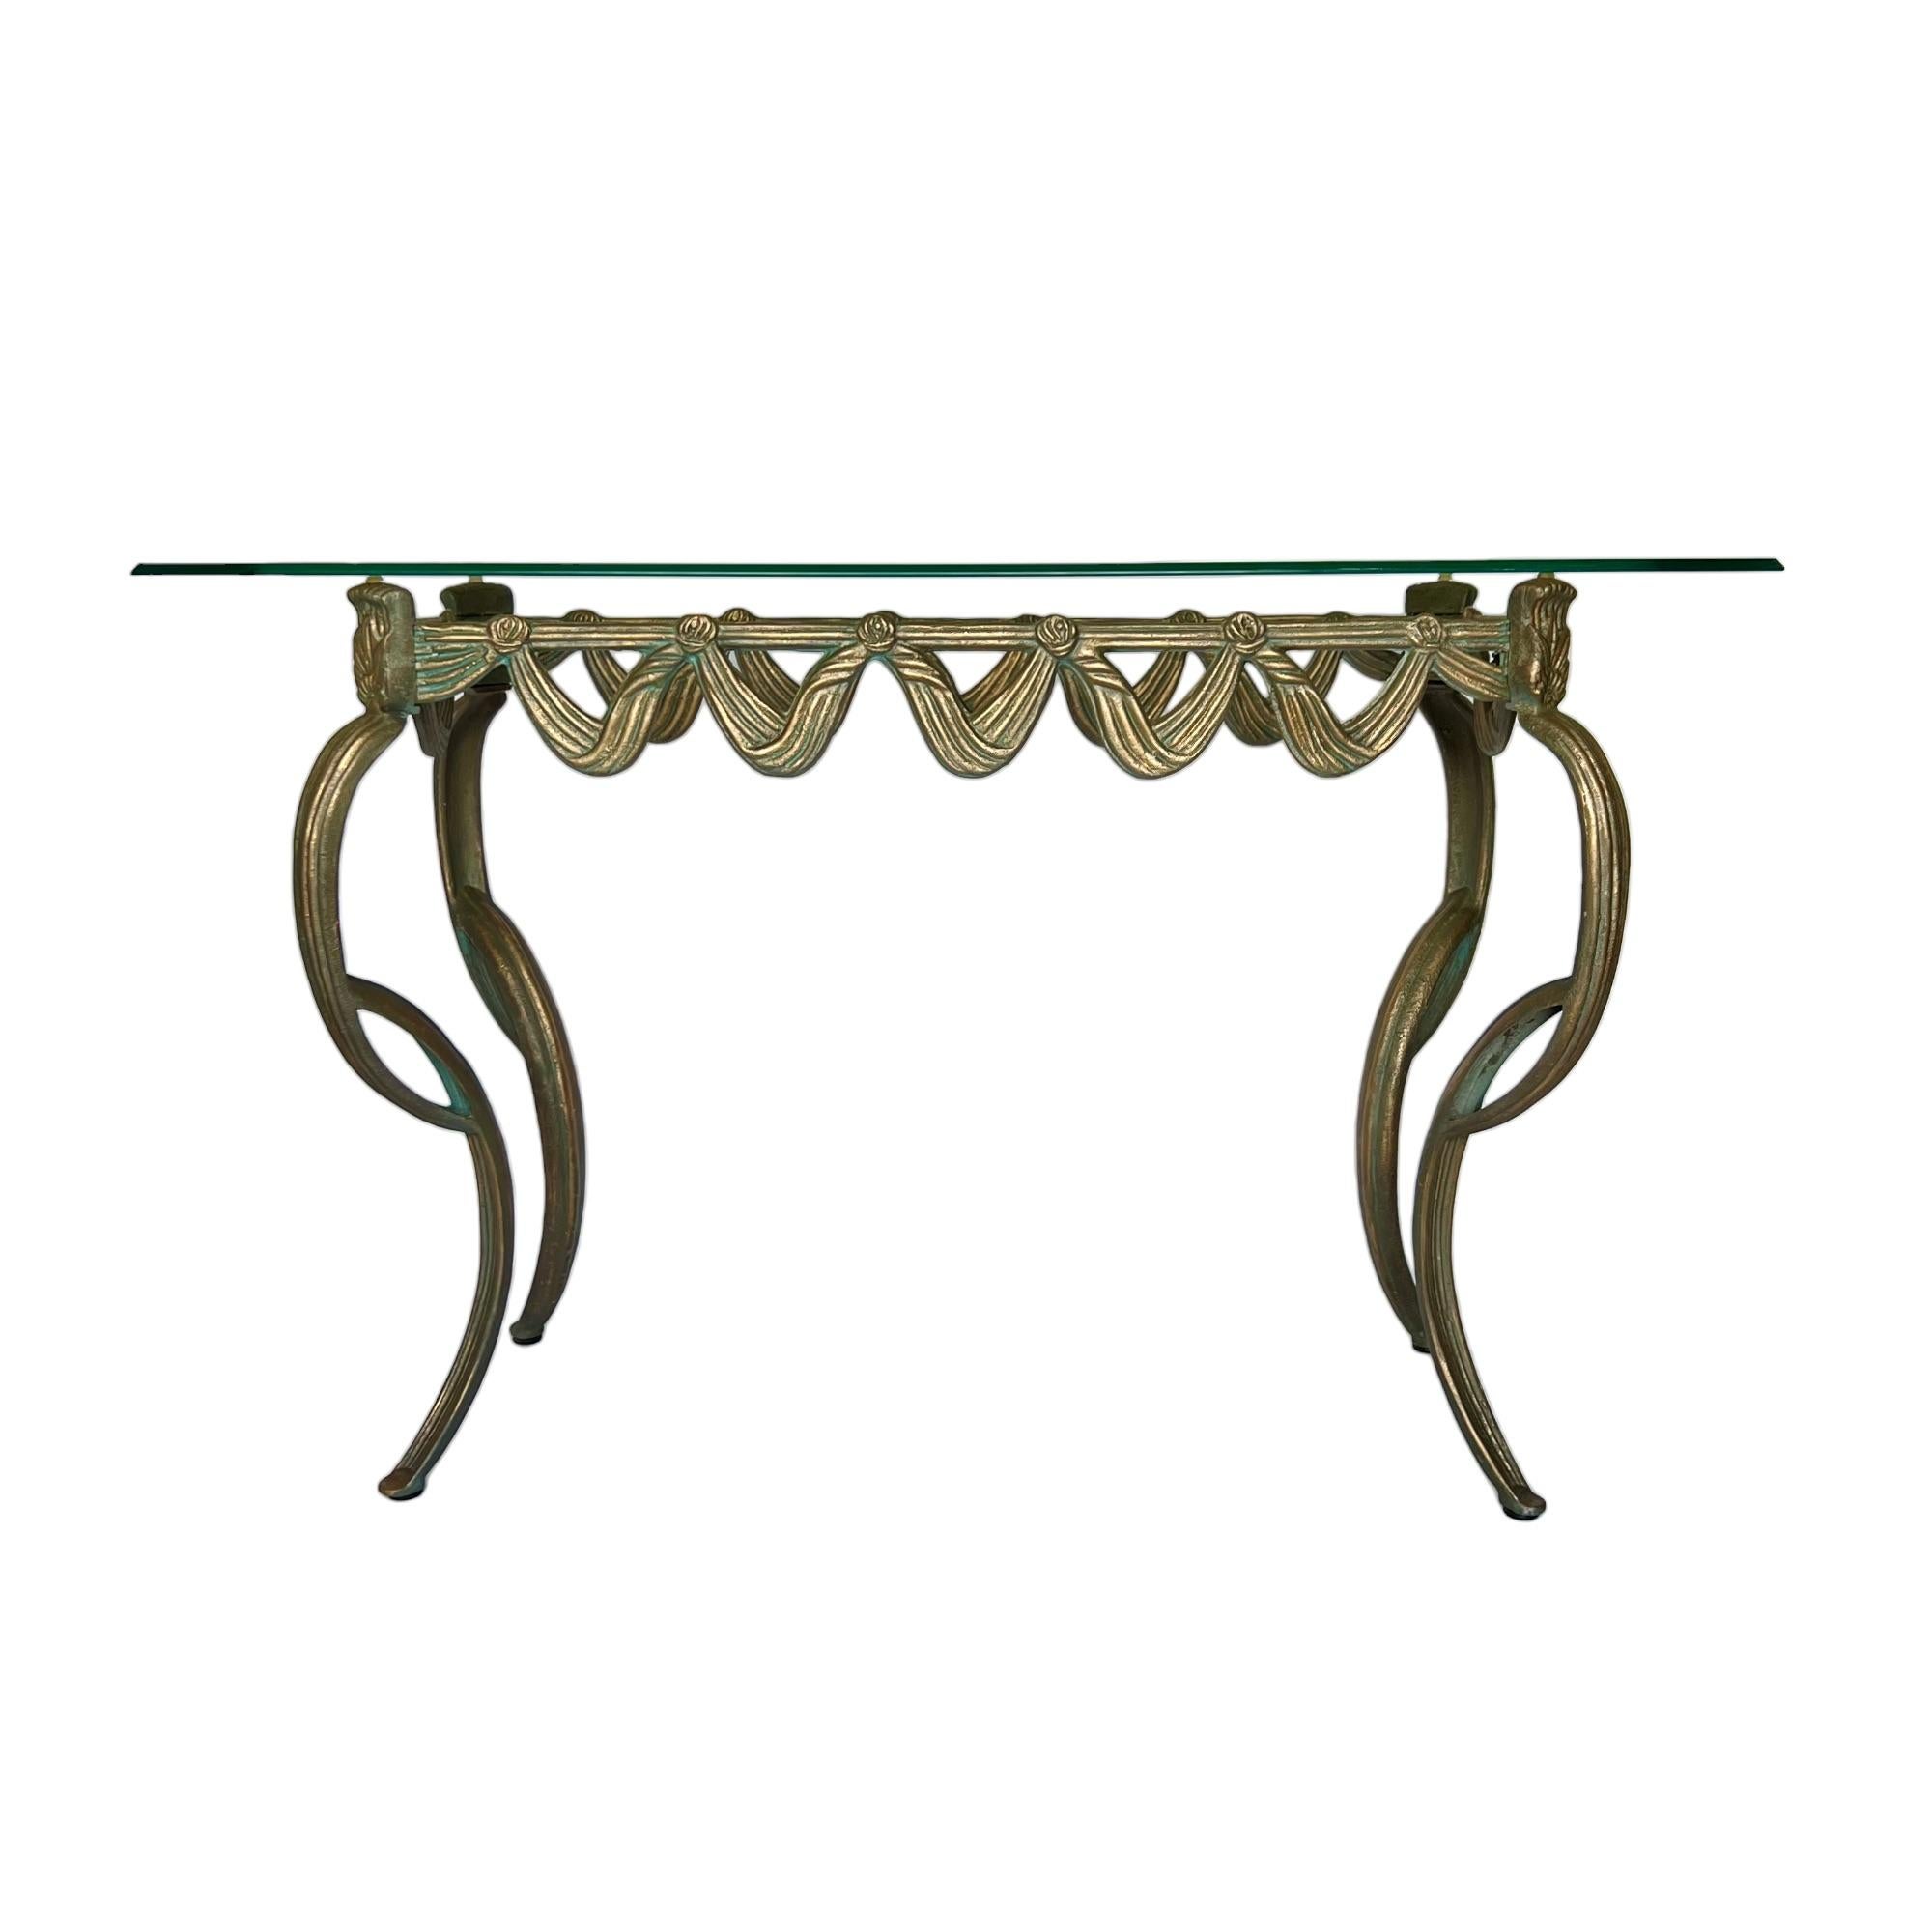 Neoclassical Gold Patinated Cast Metal Cabriole Console Table, Late 20th C.